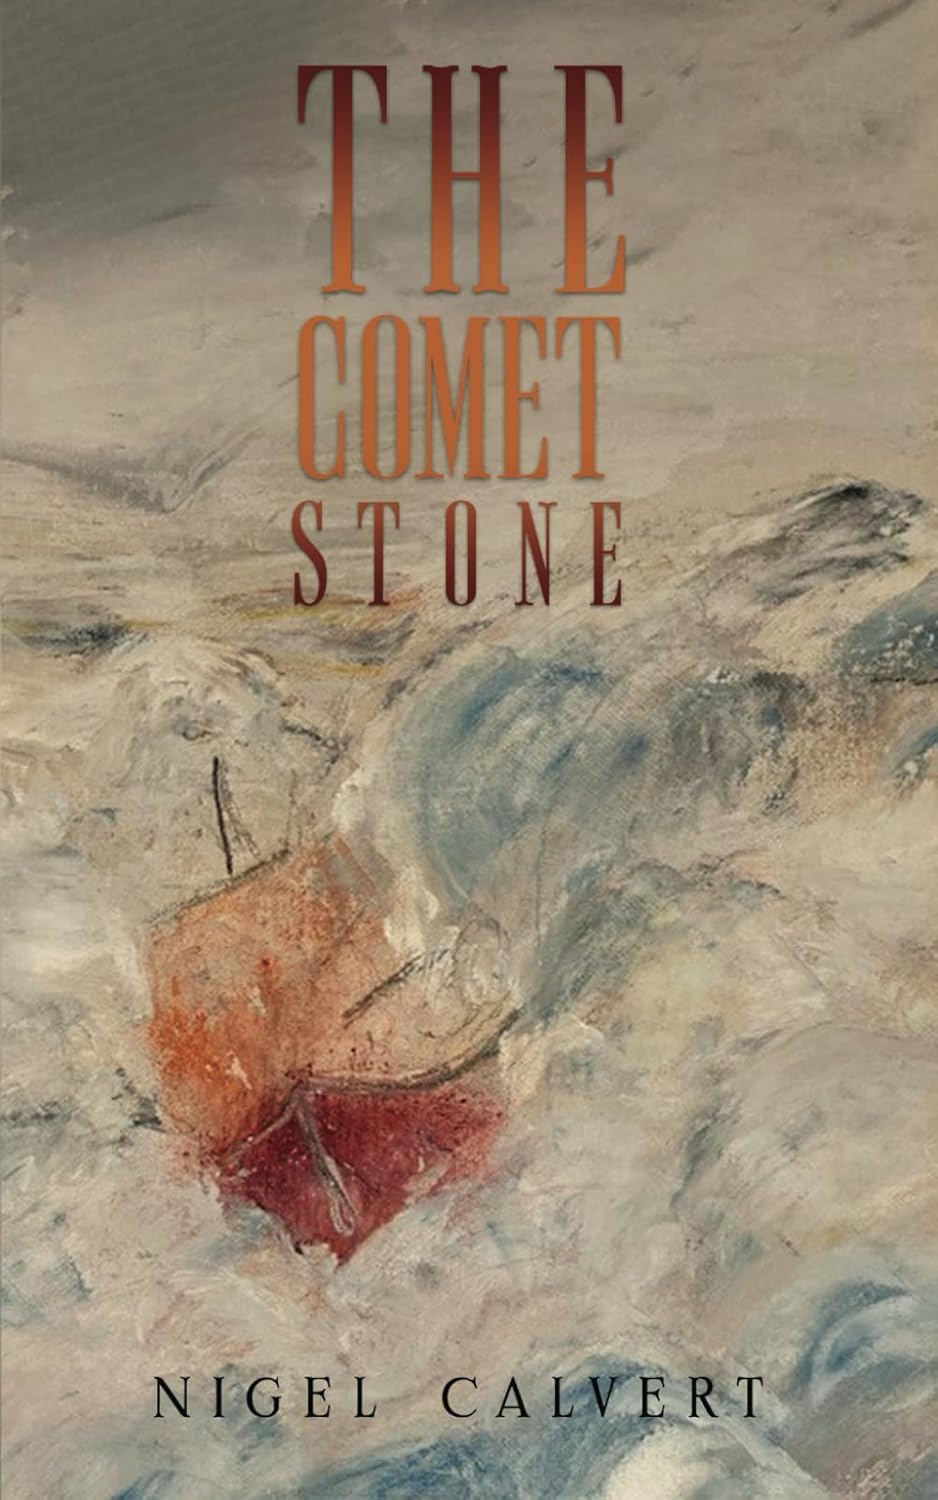 Captivating New Novel, "The Comet Stone," by Nigel Calvert, Set to Enchant Readers With an Unforgettable Tale of Adventure and Mystery